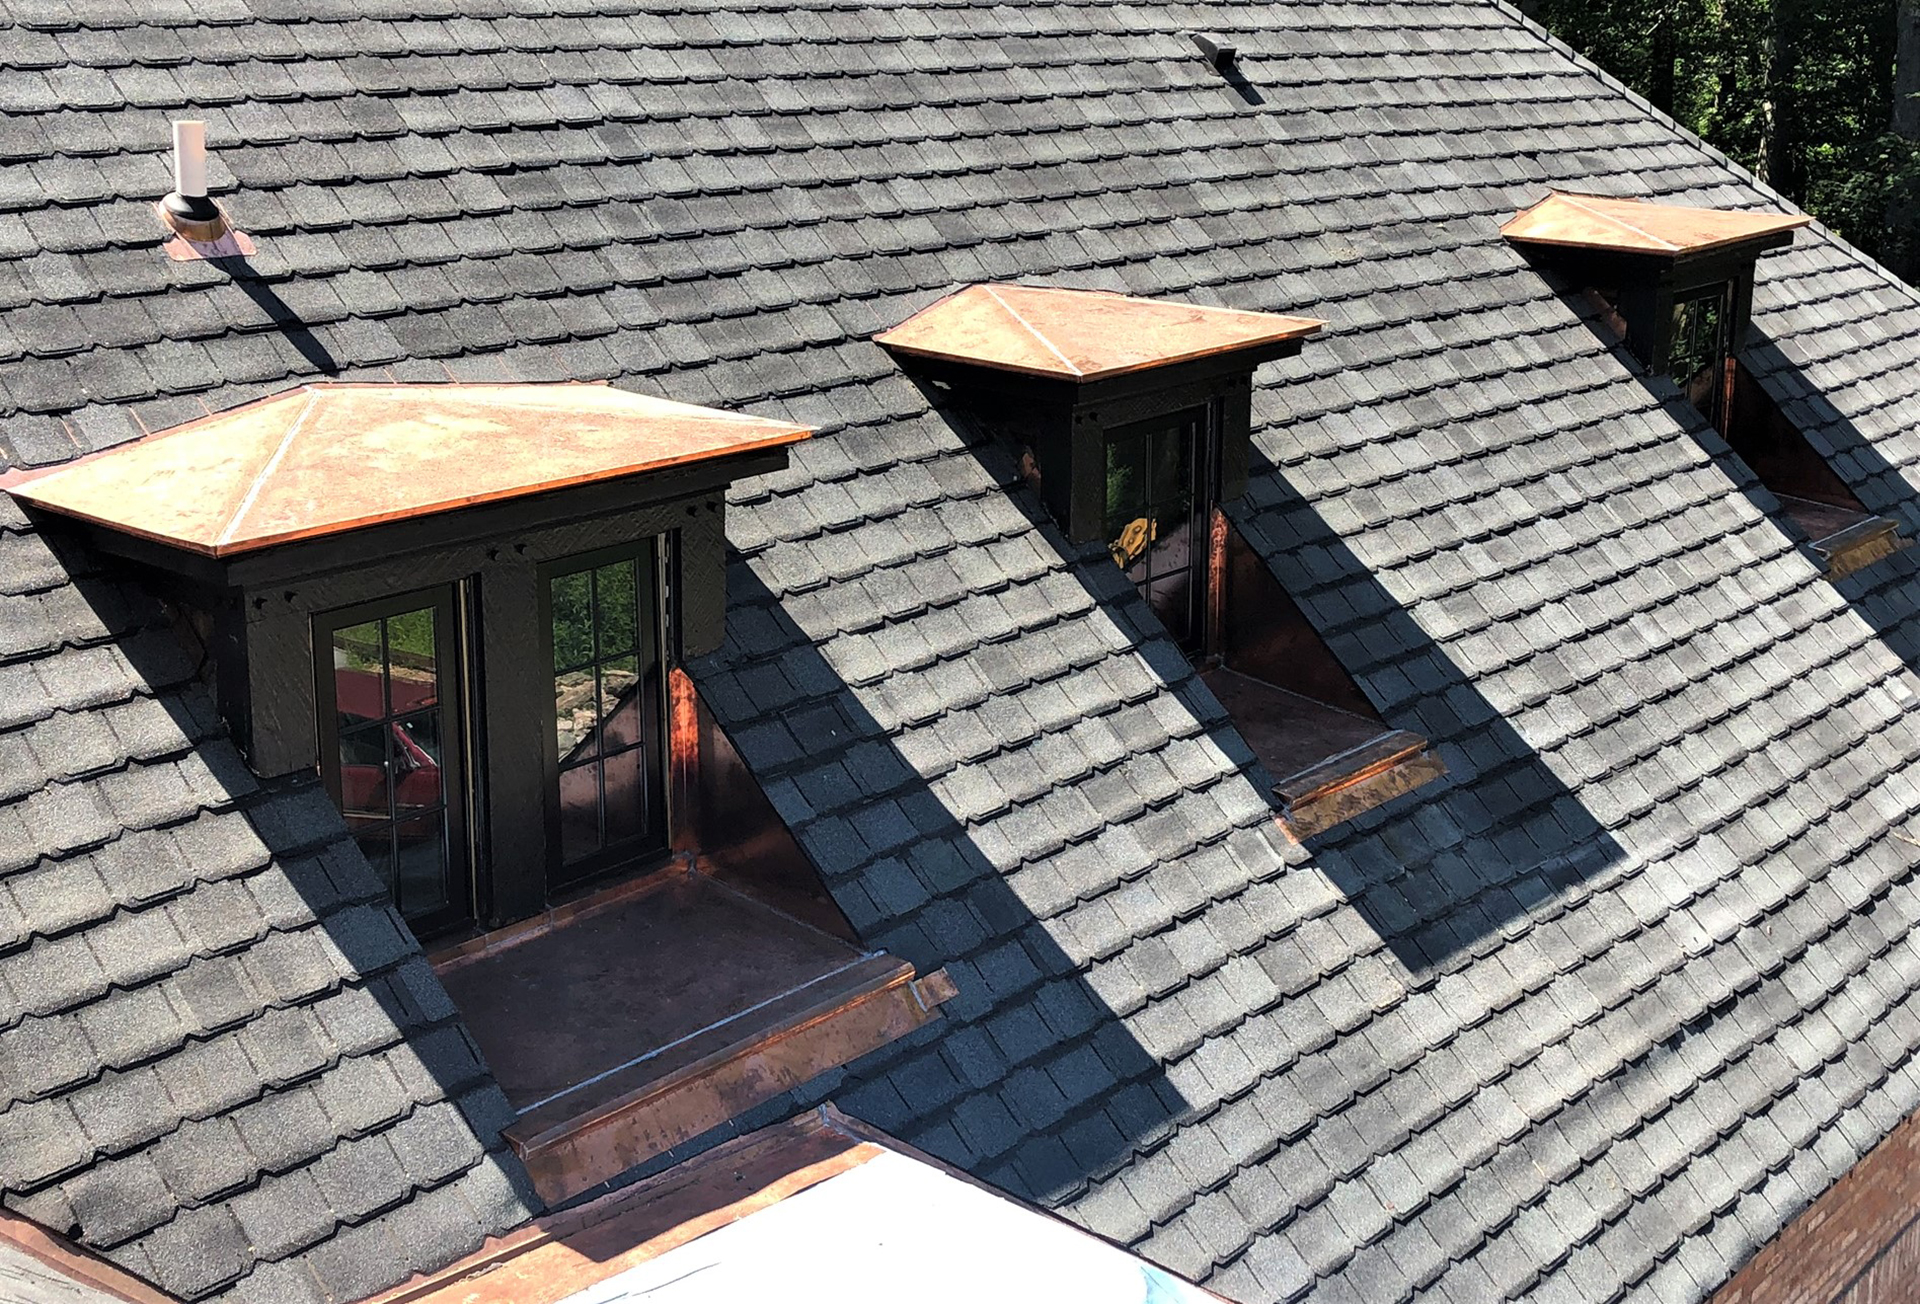 A copper roof with asphalt shingles